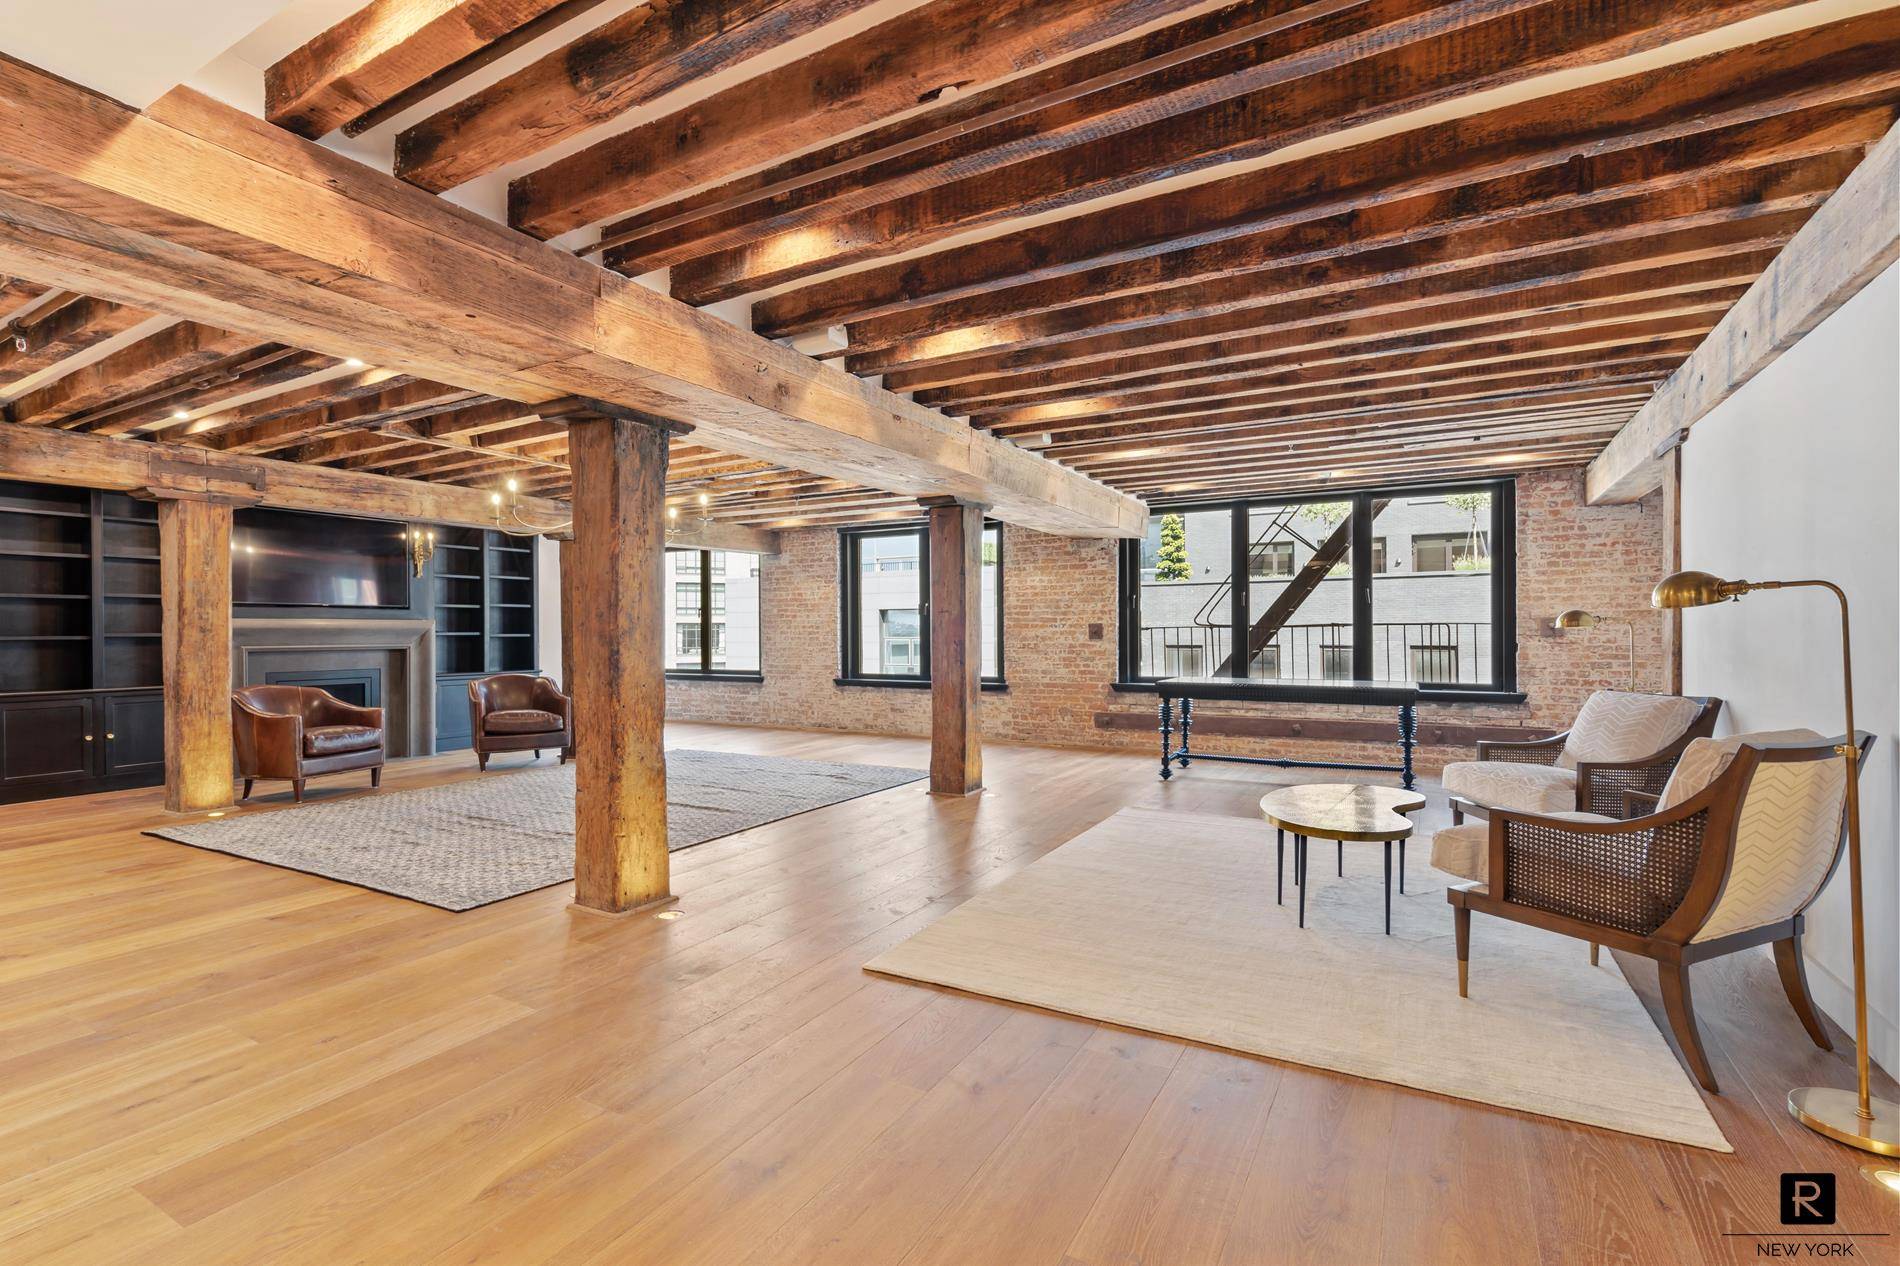 Located on the sixth floor of an elevator loft building in TriBeCa, this newly renovated apartment is unmatched.